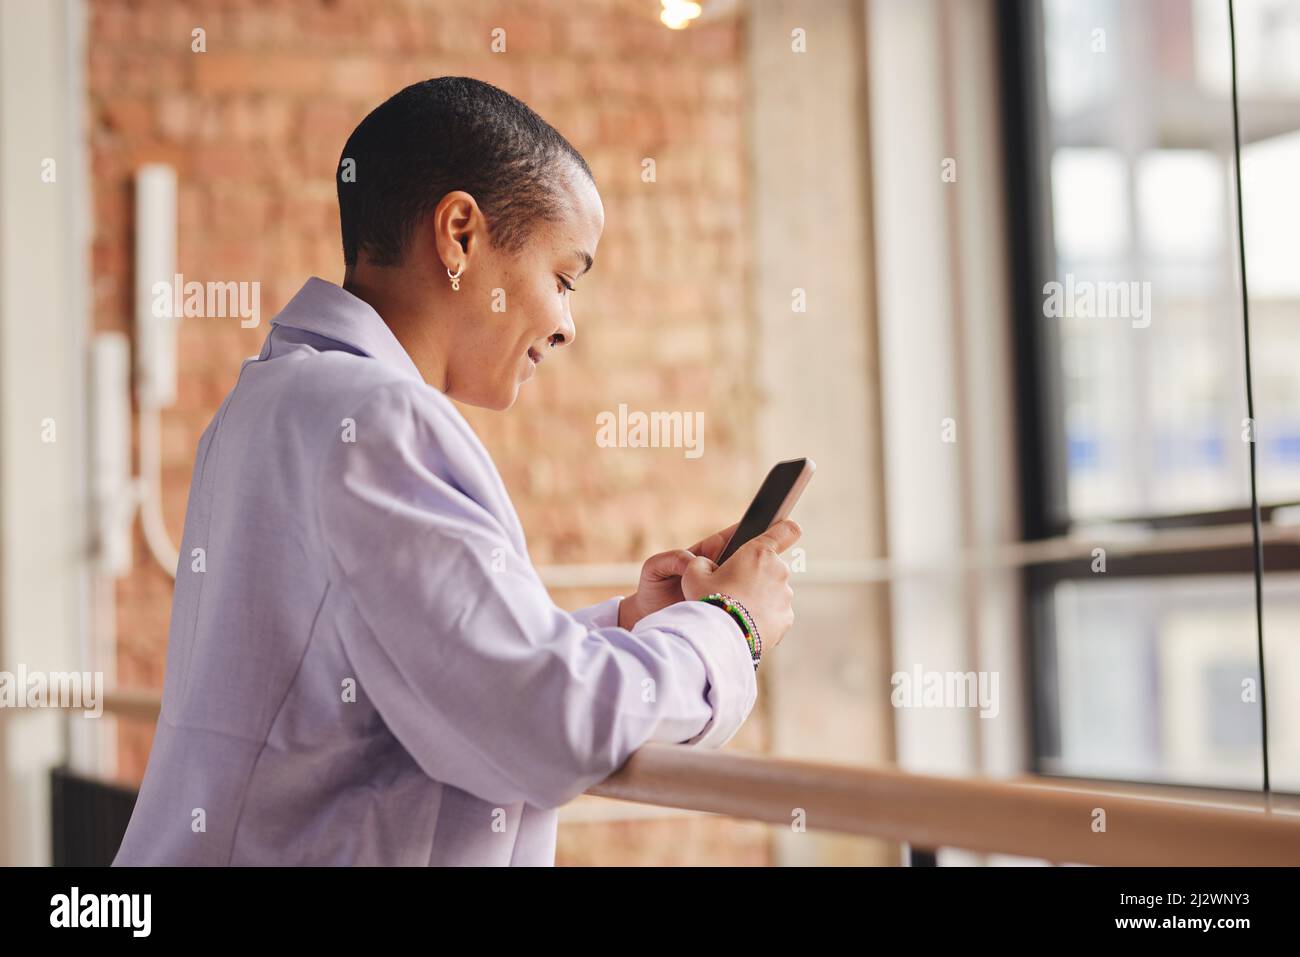 Portrait of cheerful multiracial LGBTQ mid adult woman leaning on railing and using smartphone Stock Photo